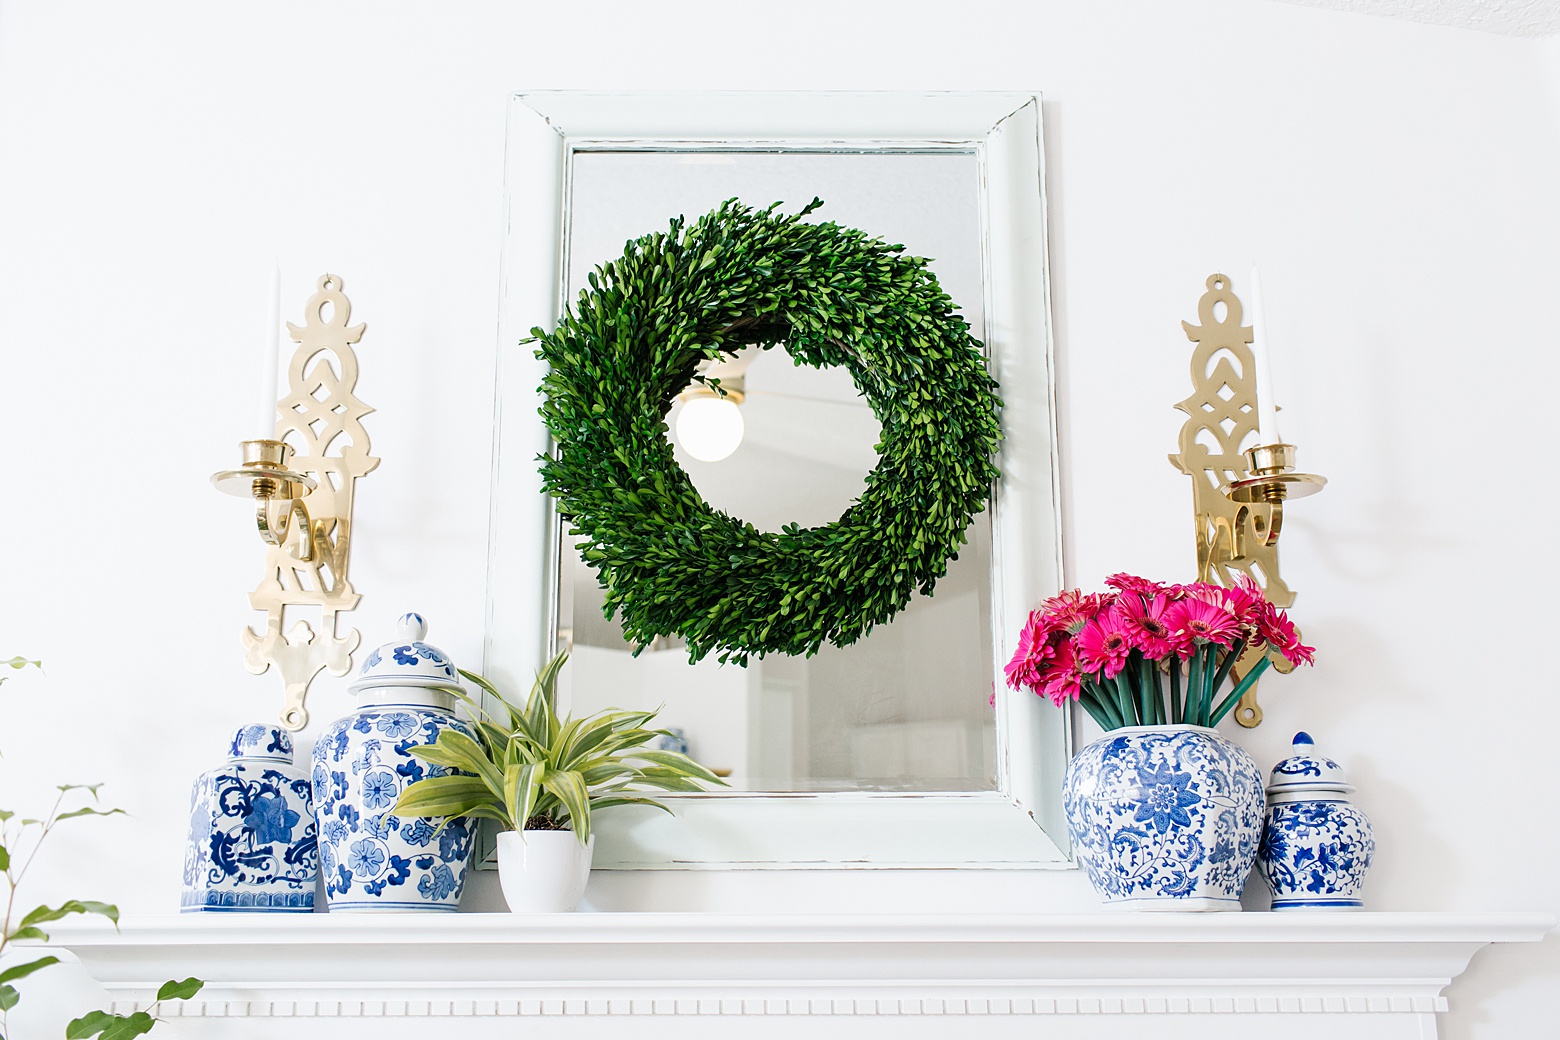 bright and colorful living room, chinoiserie, blue and white jars, wreath on mirror, mantel designed by Megan Martin Creative